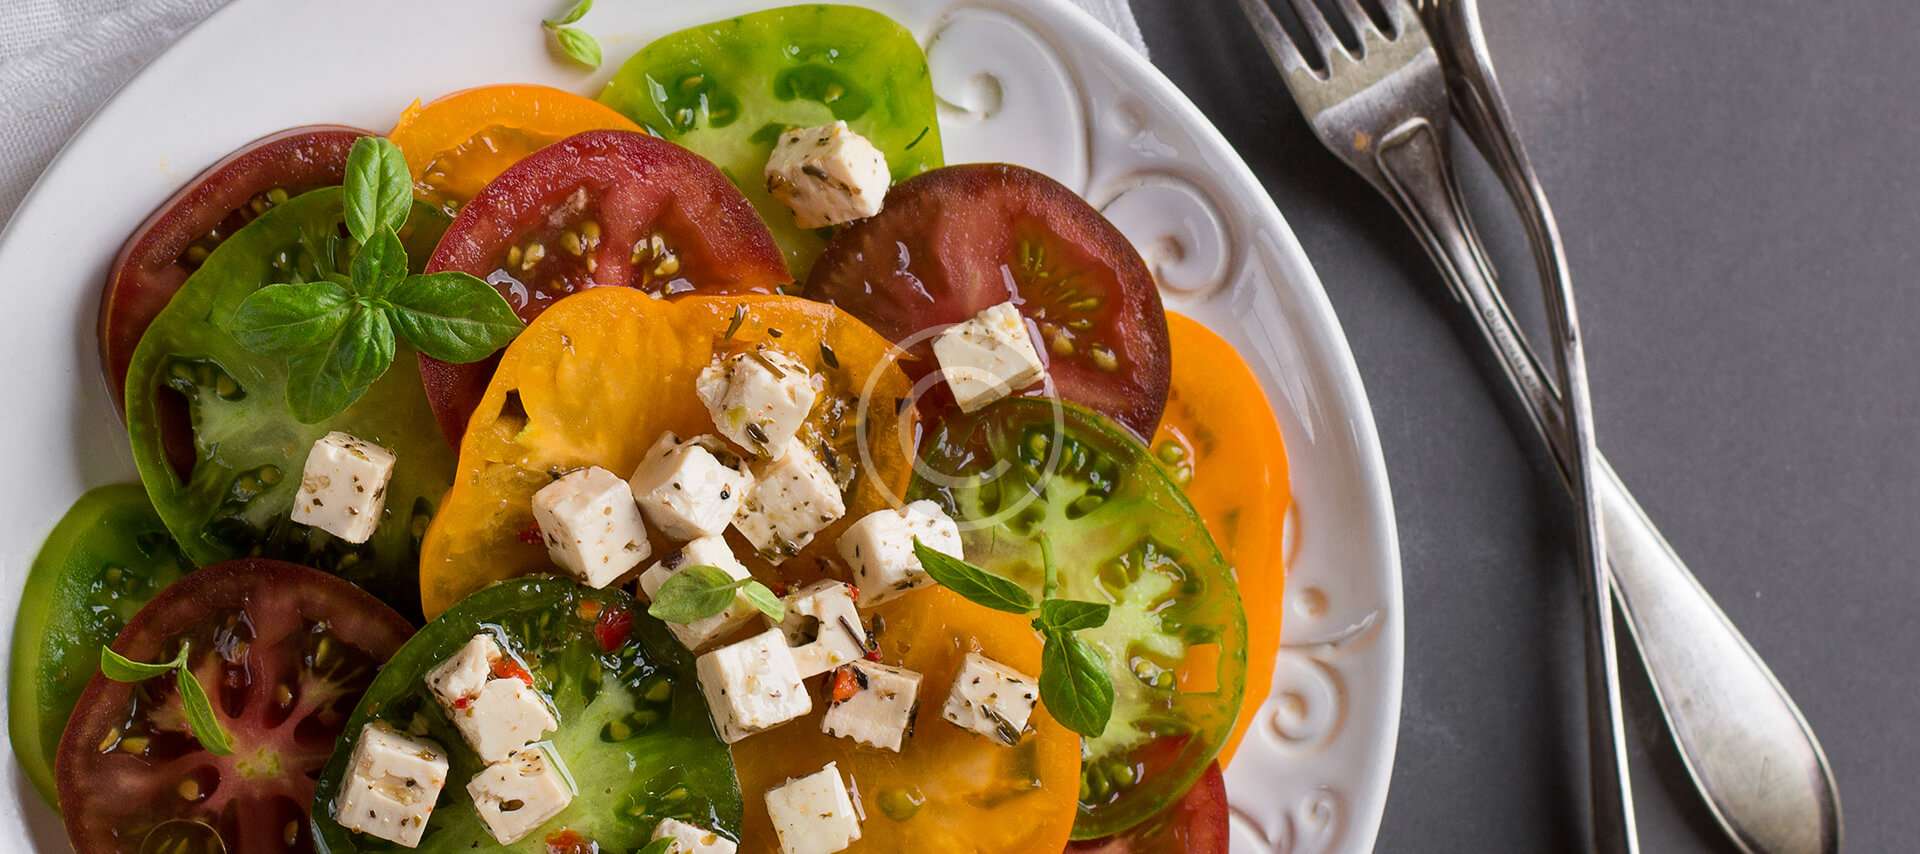 Tomato Salad with Balsamic Dressing